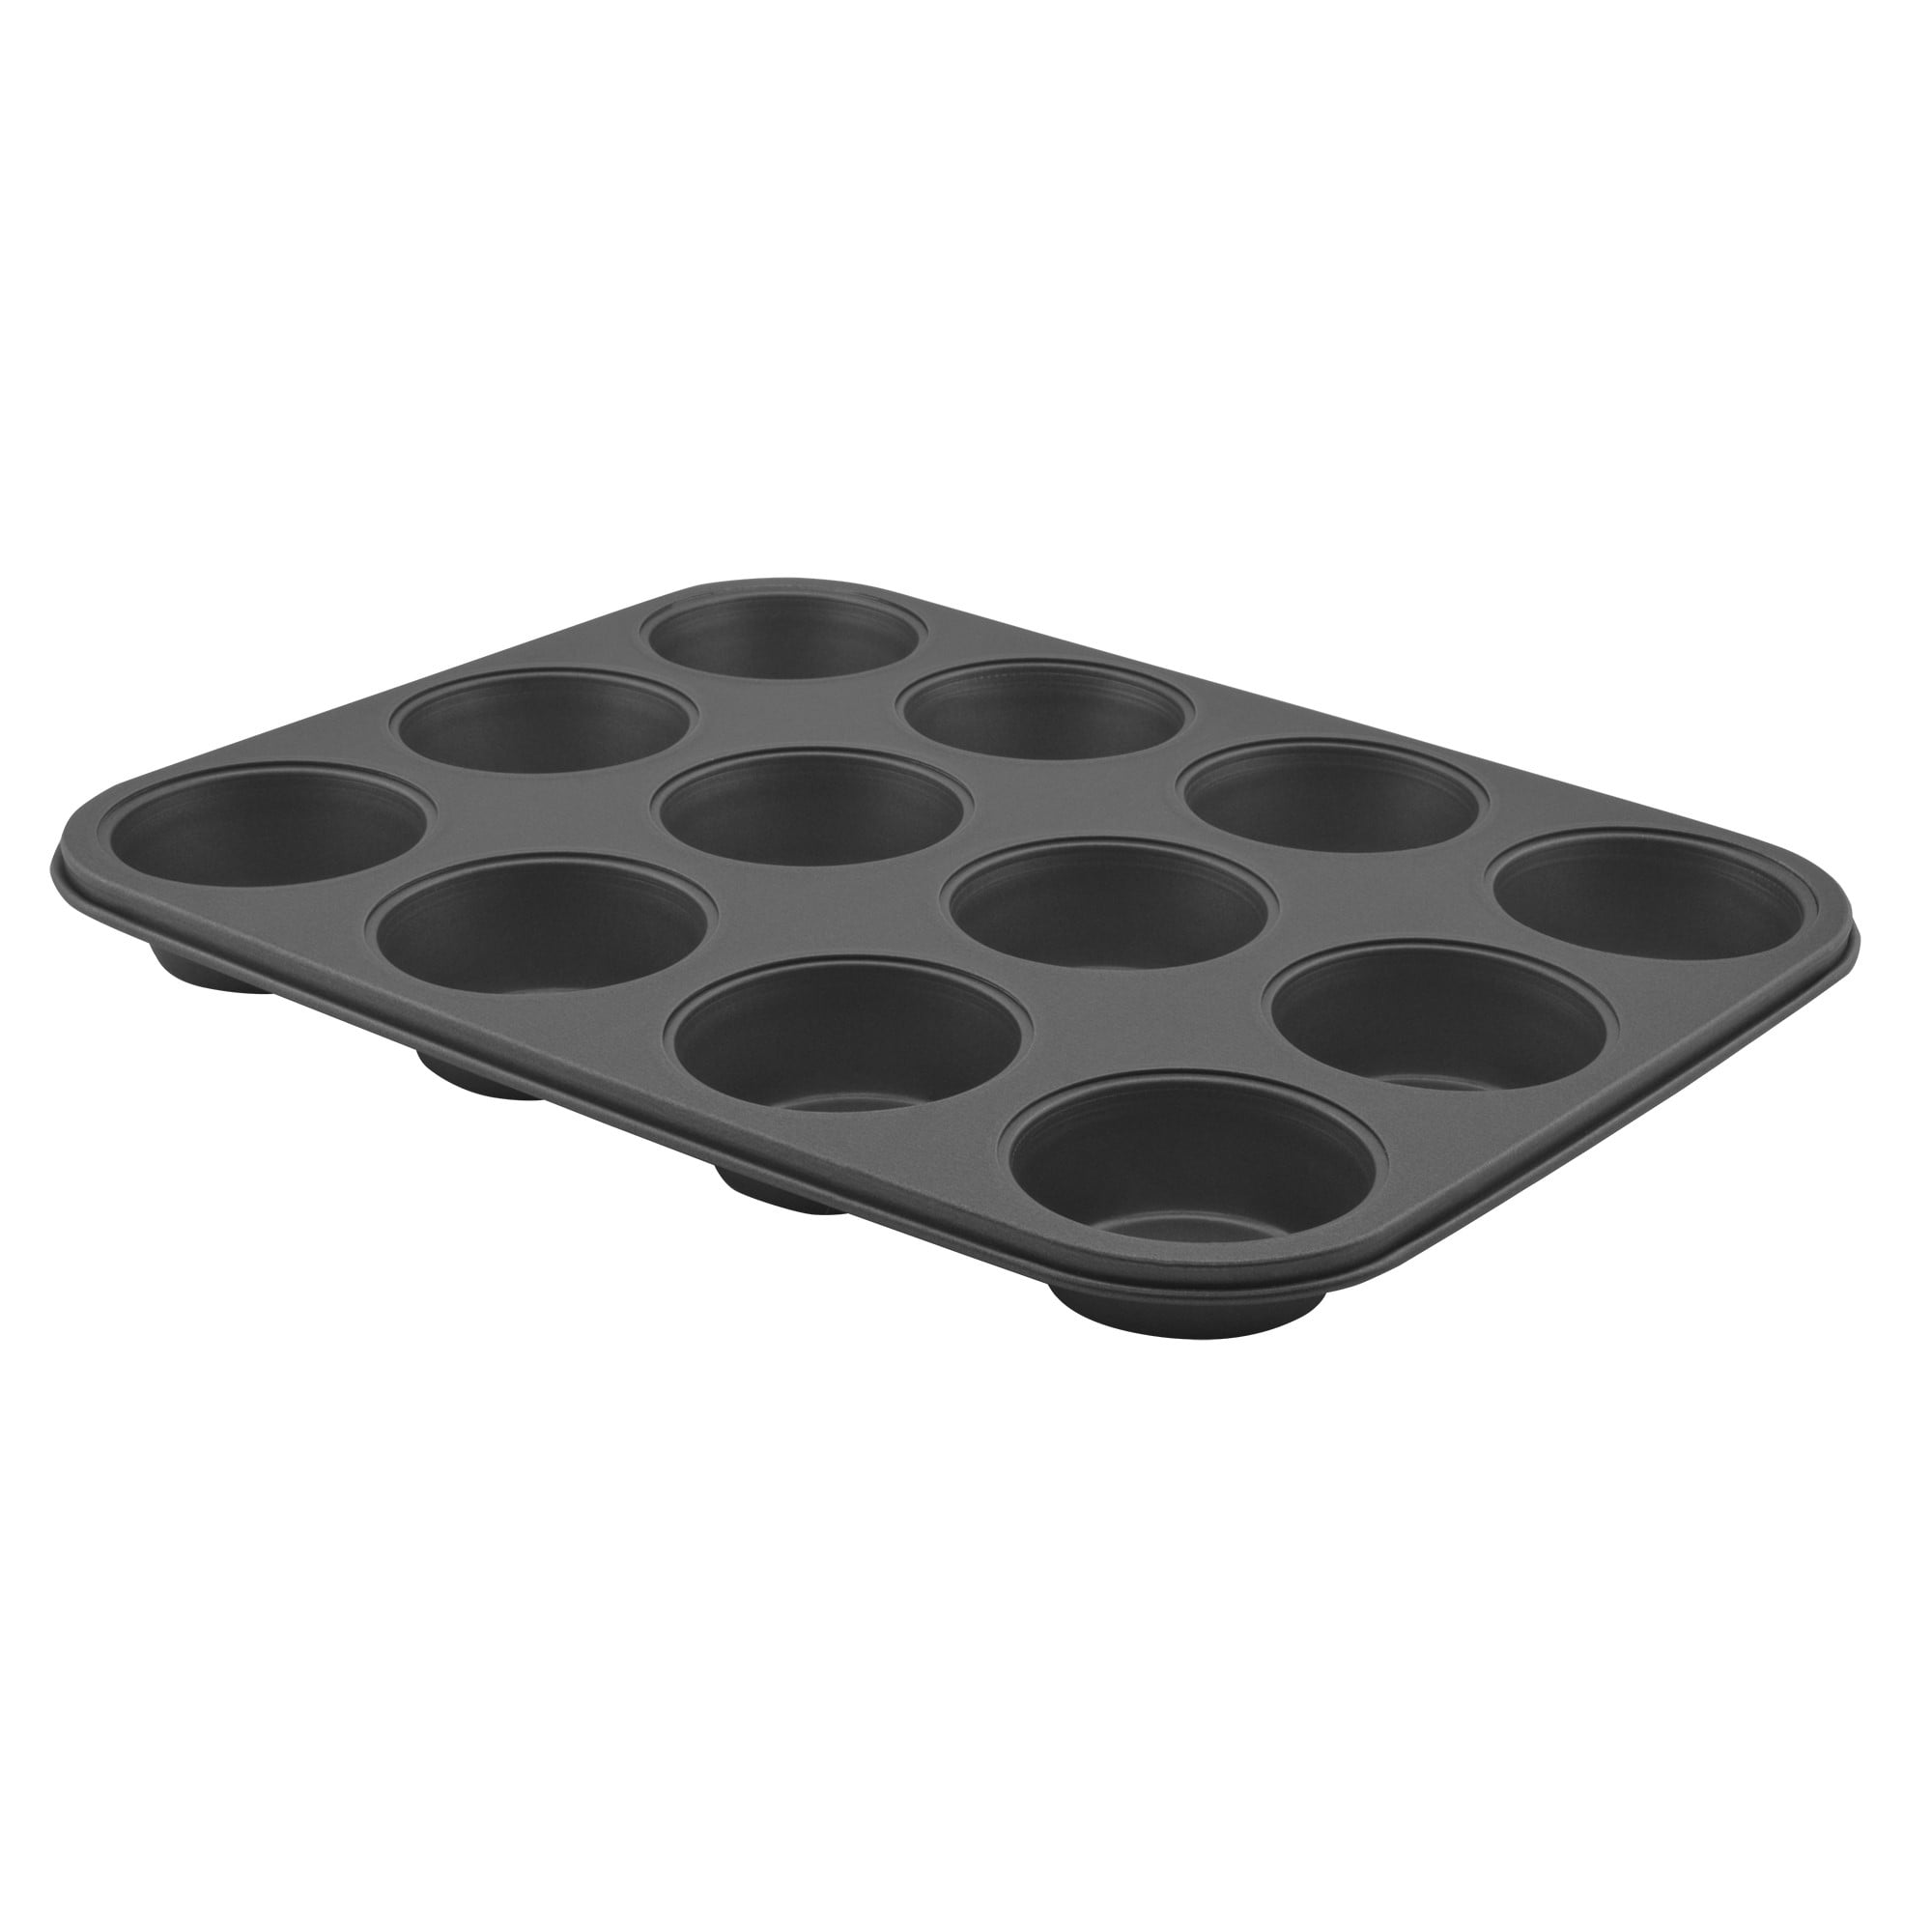 Taste of Home Non-Stick Muffin Pan at Tractor Supply Co.